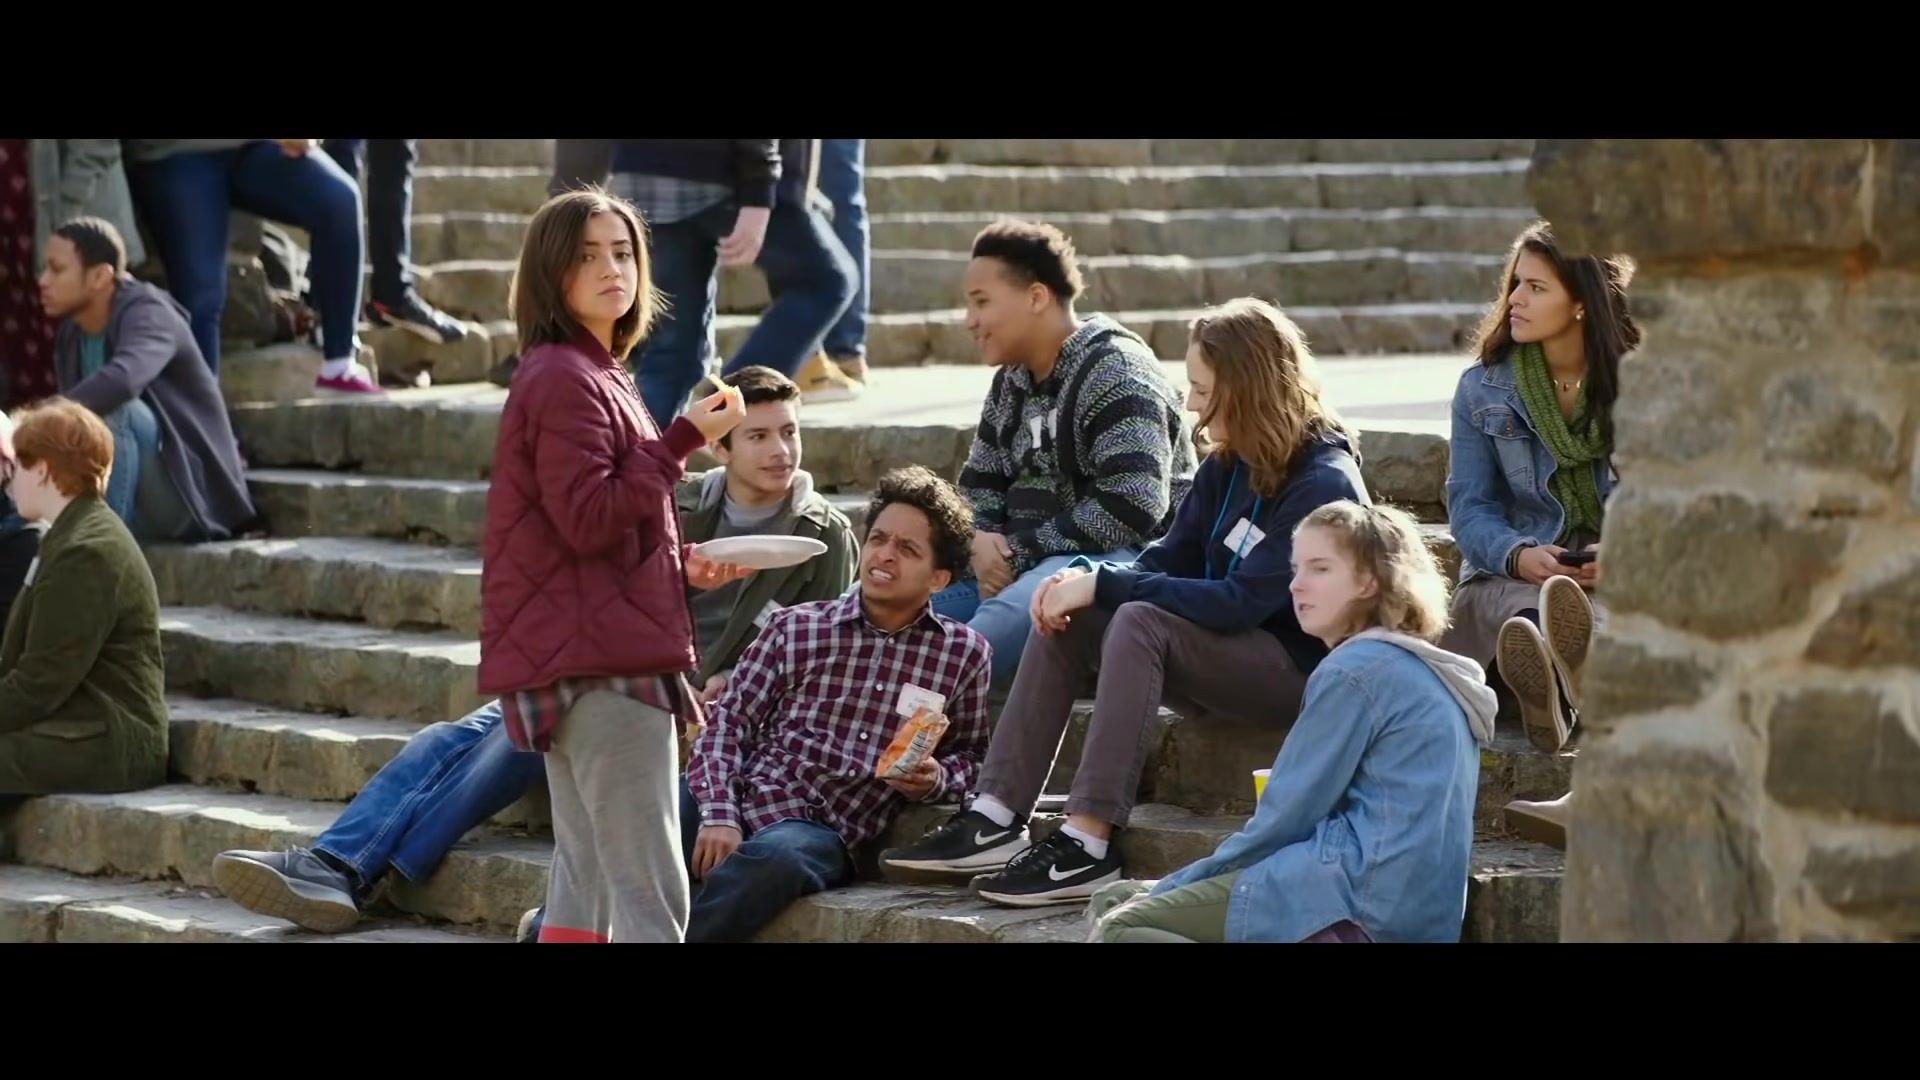 Nike Shoes in Instant Family (2018) Movie